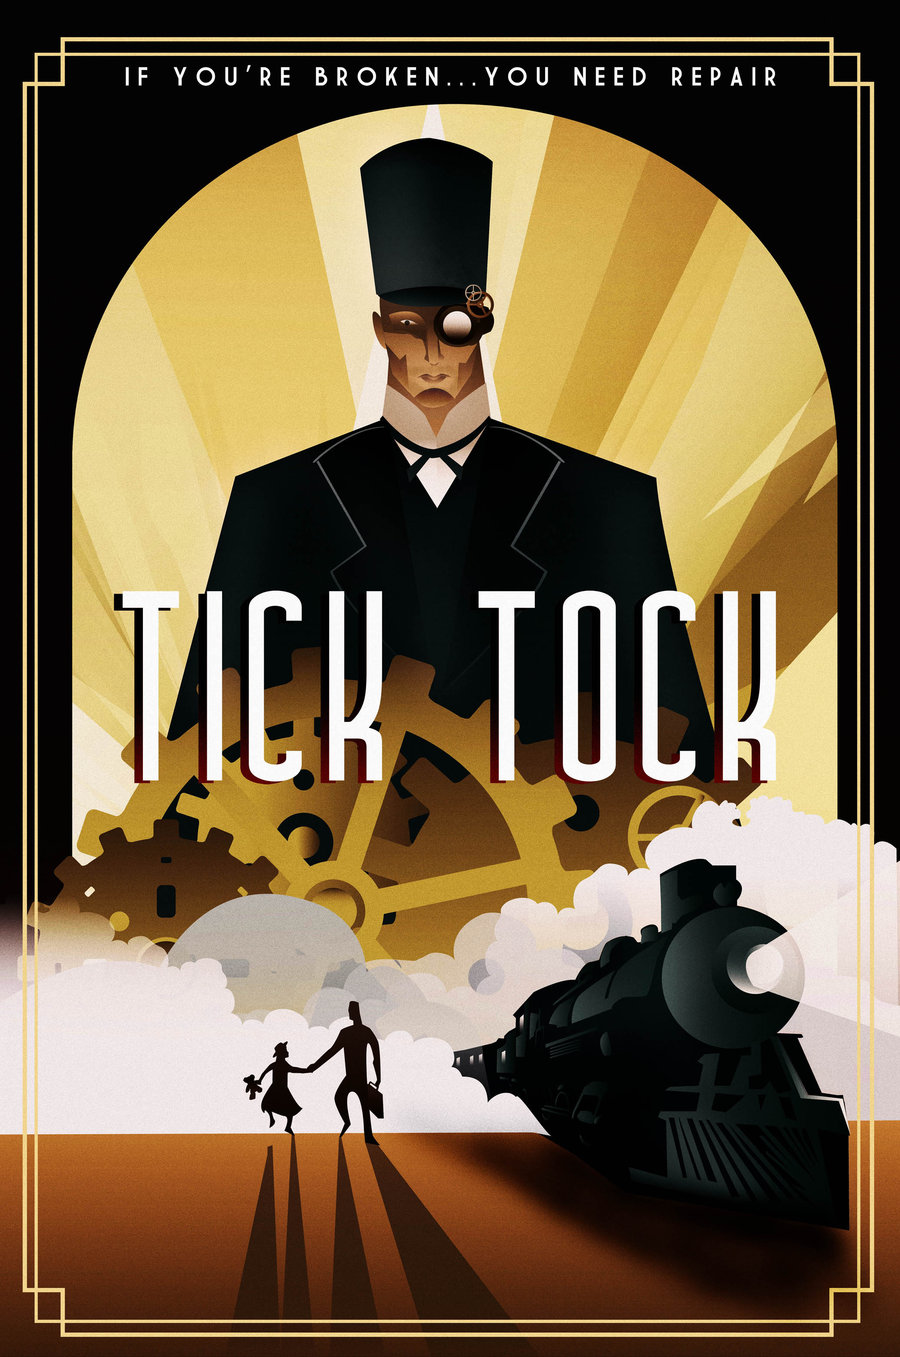 tick_tock_movie_poster_by_rodolforever